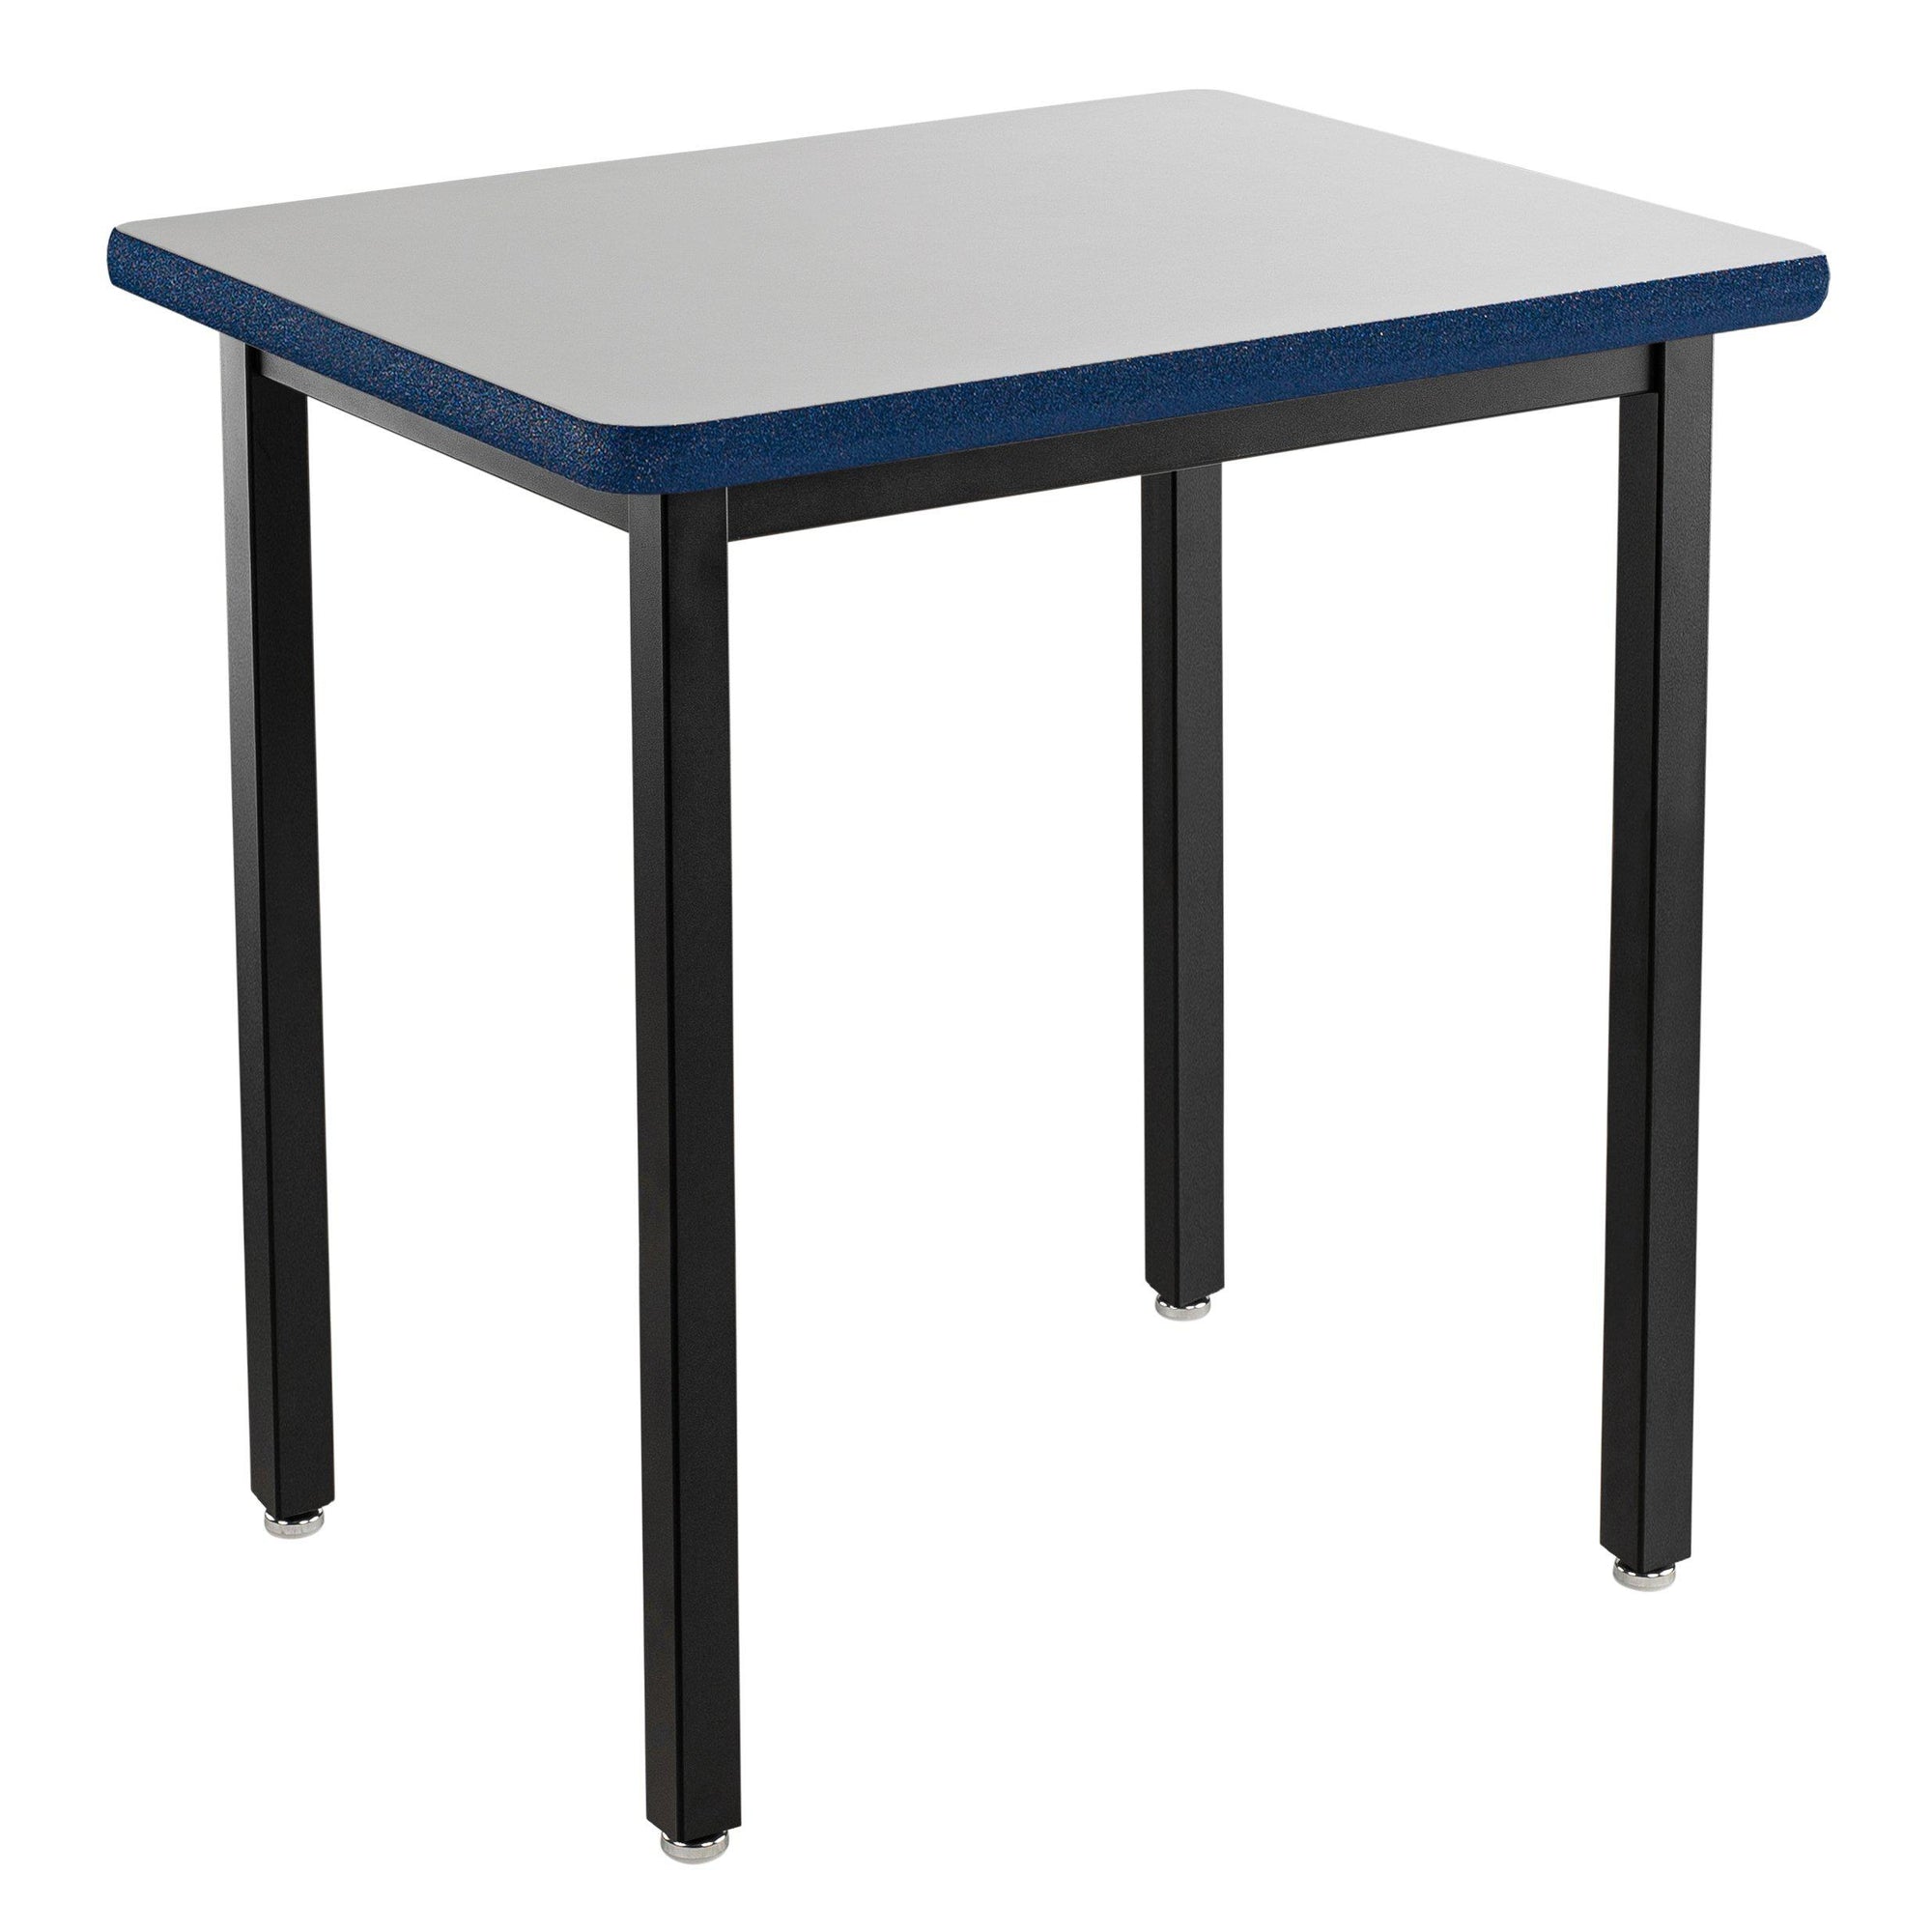 Heavy-Duty Fixed Height Utility Table, Black Frame, 30" x 30", Supreme High-Pressure Laminate Top with Black ProtectEdge